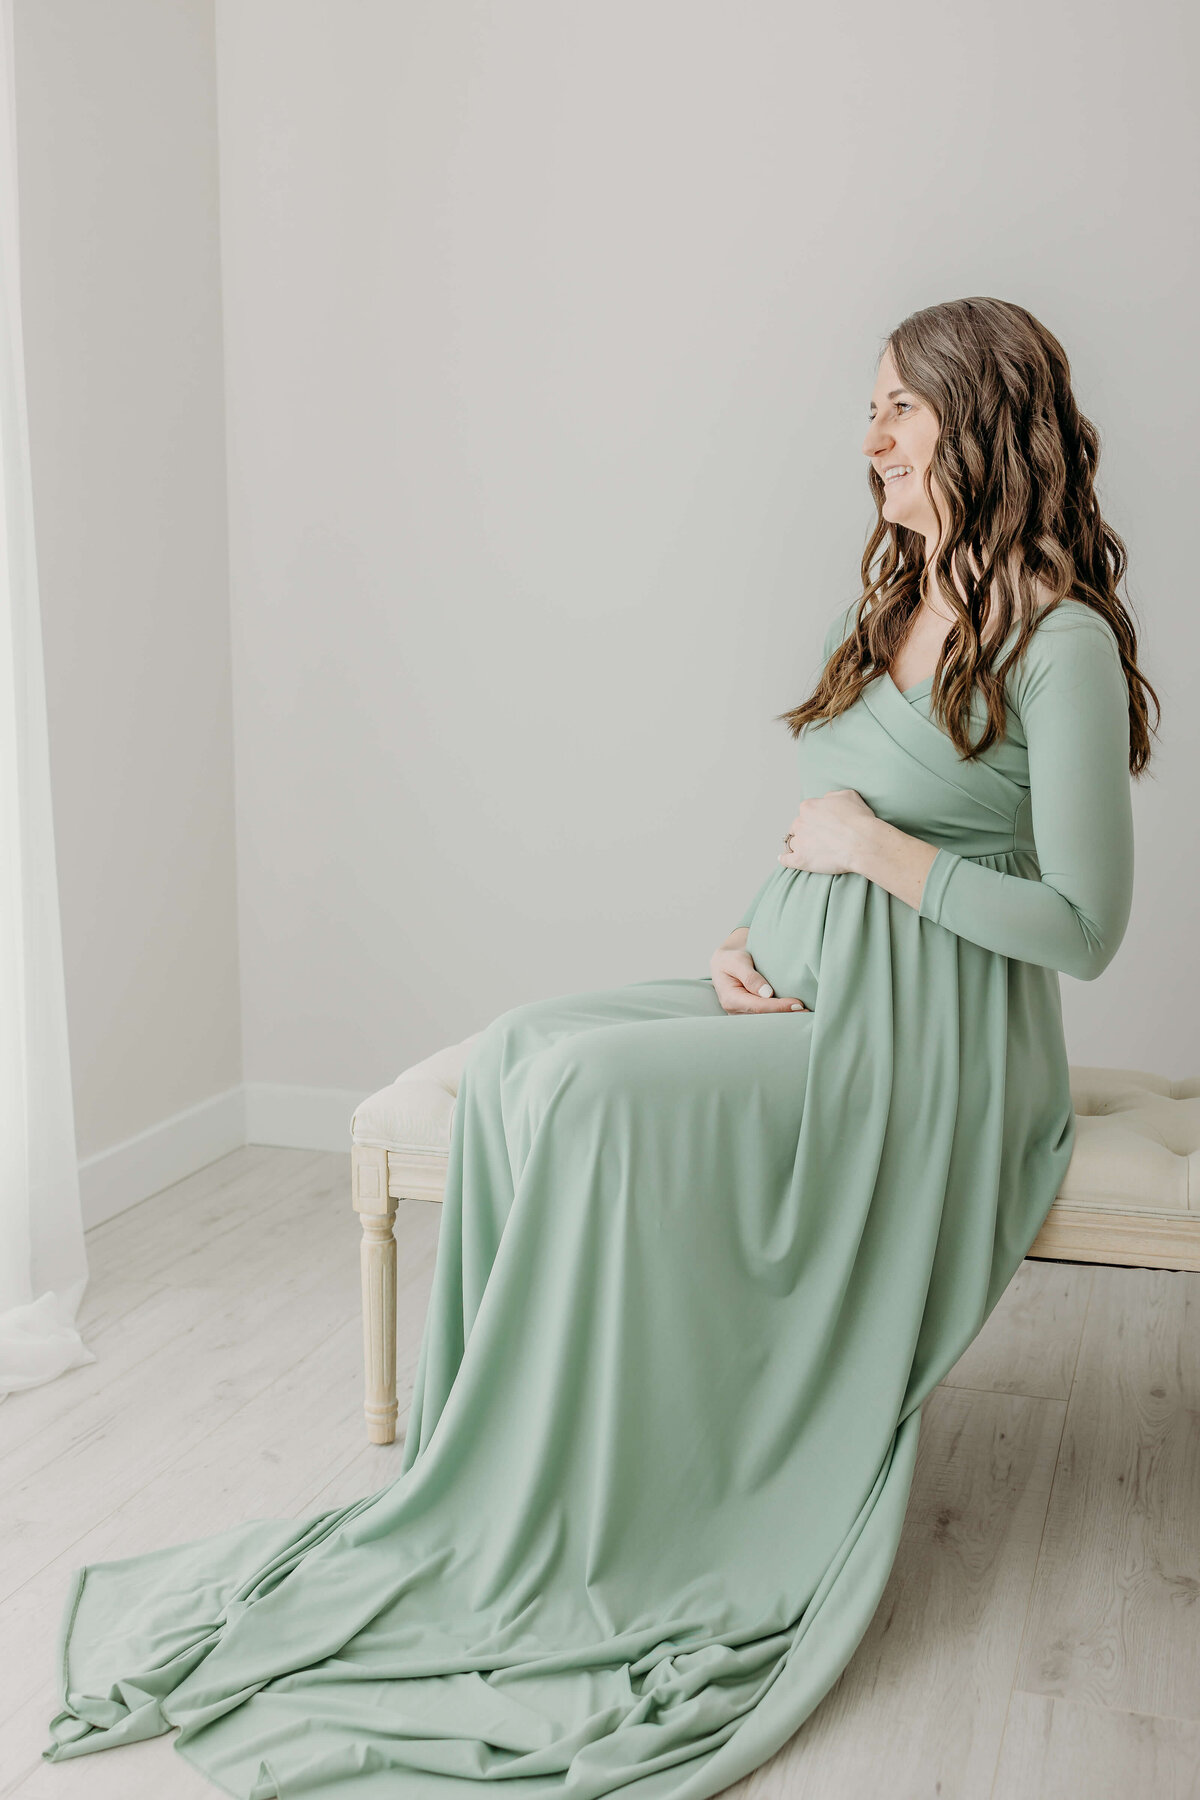 Mom laughing and looking out window pregnant in long green dress sitting on bench